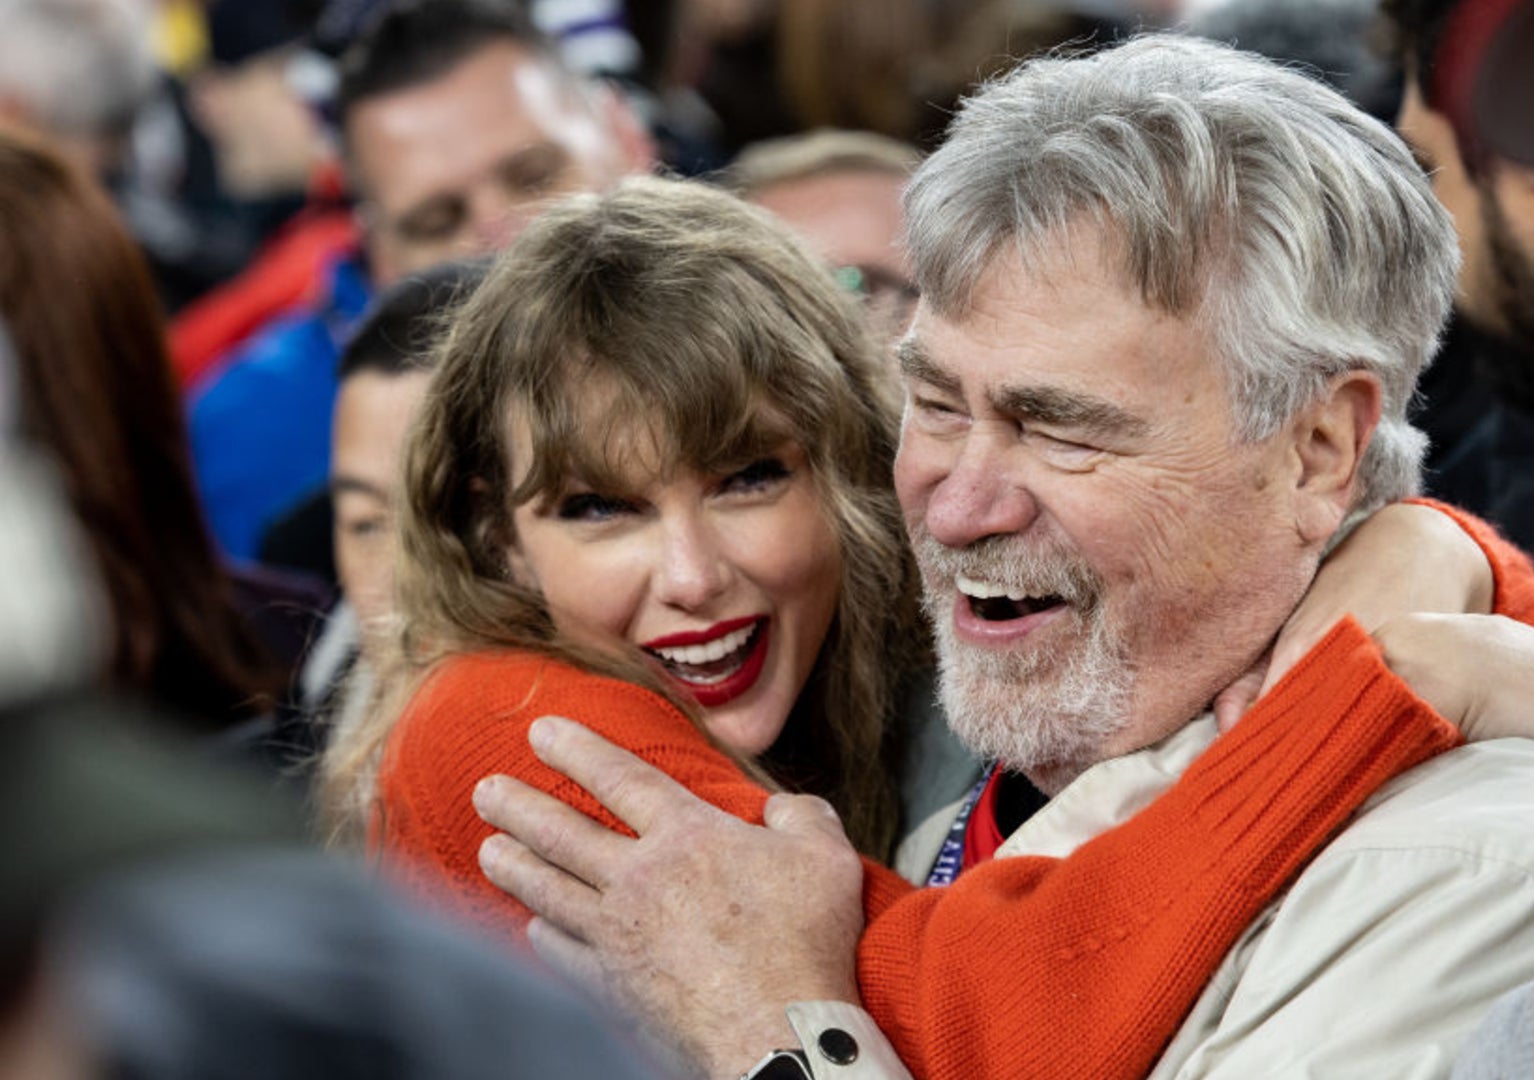  Taylor Swift hugs Ed Kelce after the AFC Championship NFL football game between the Kansas City Chiefs and Baltimore Ravens at M&T Bank Stadium on January 28, 2024 in Baltimore, Maryland.